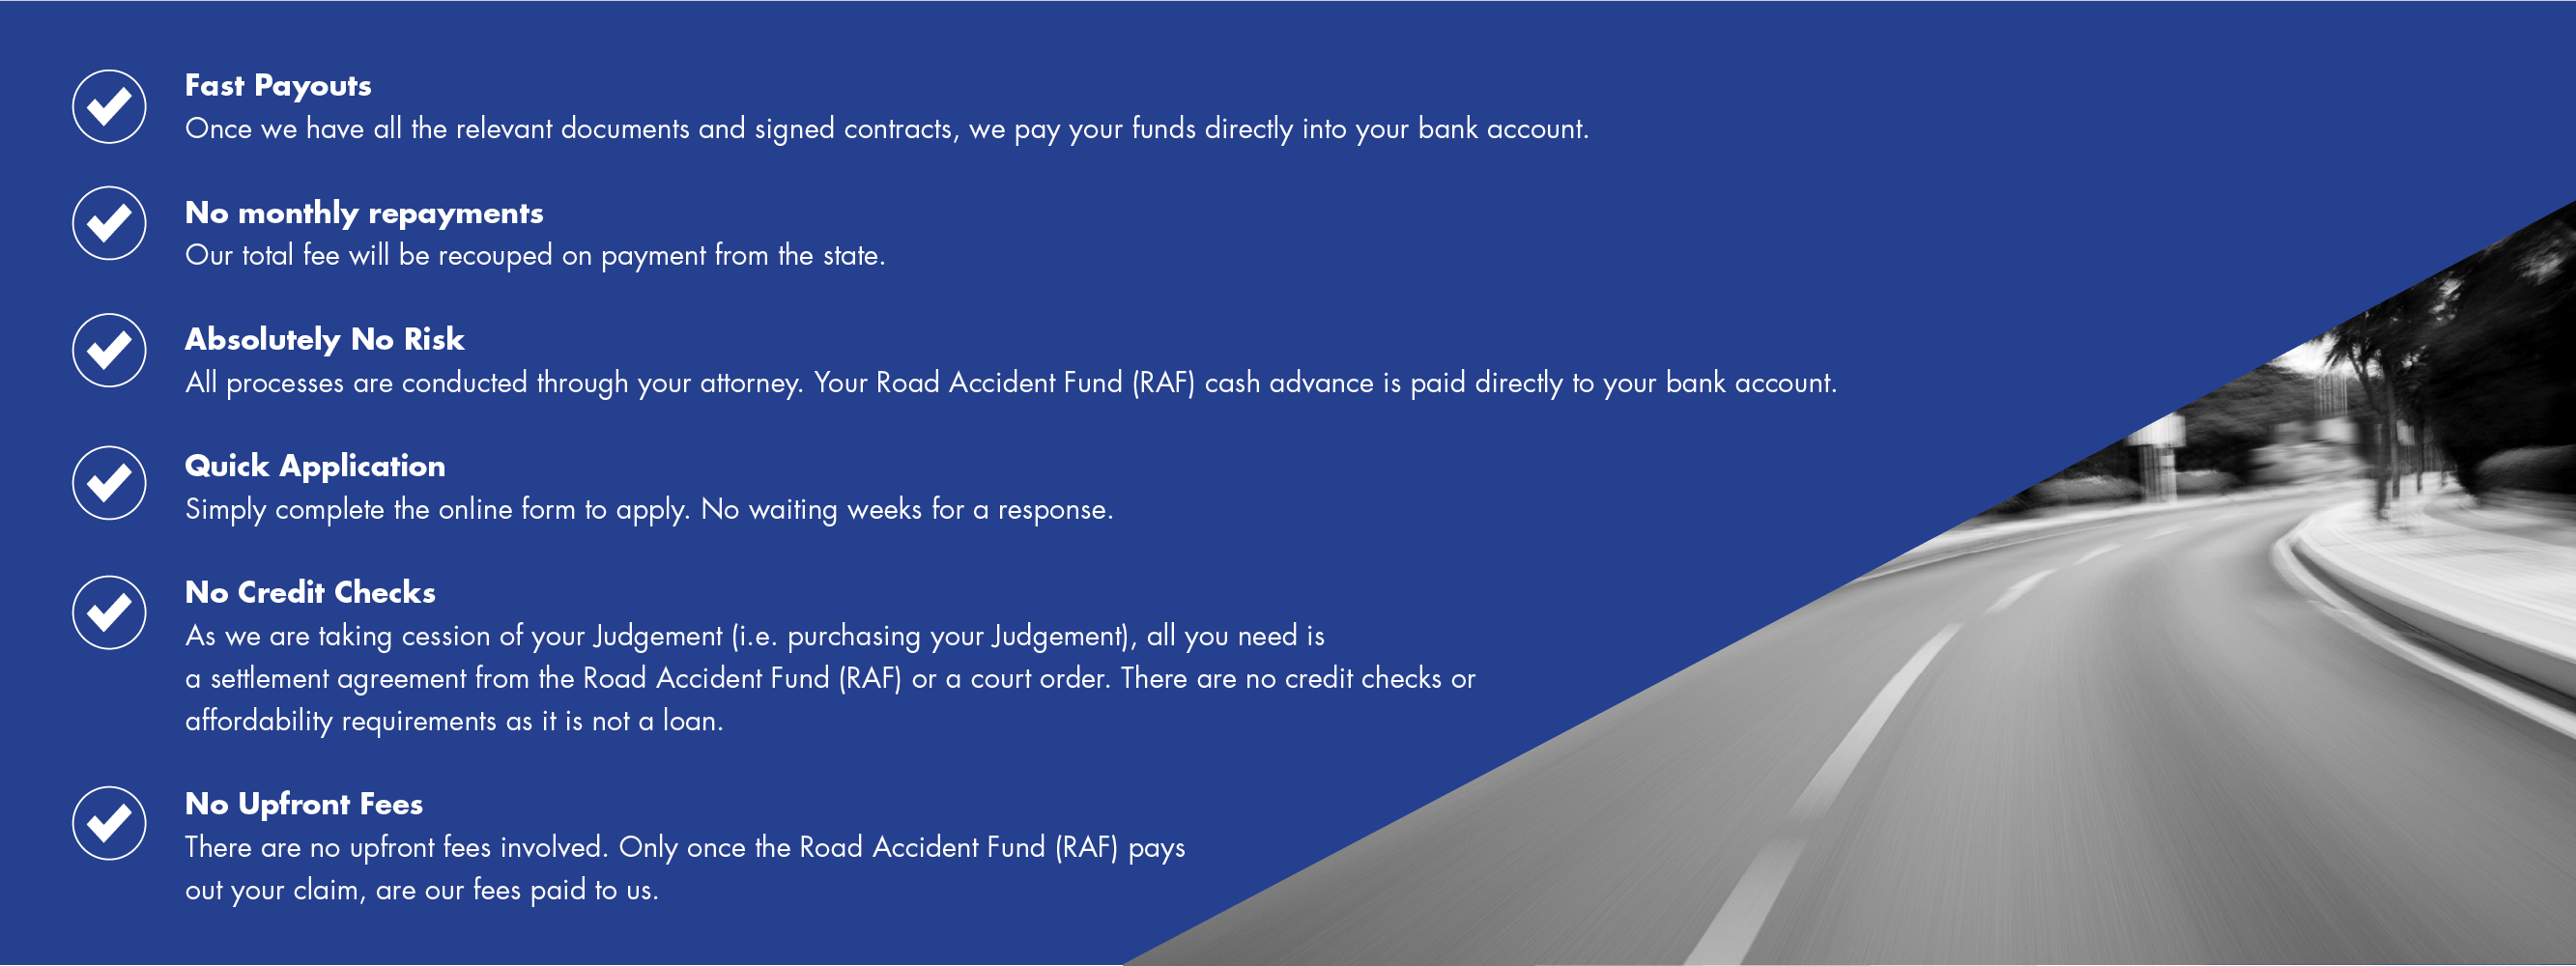 Bridging Finance For Settled Road Accident Fund Raf Claims Augury Capital 6212